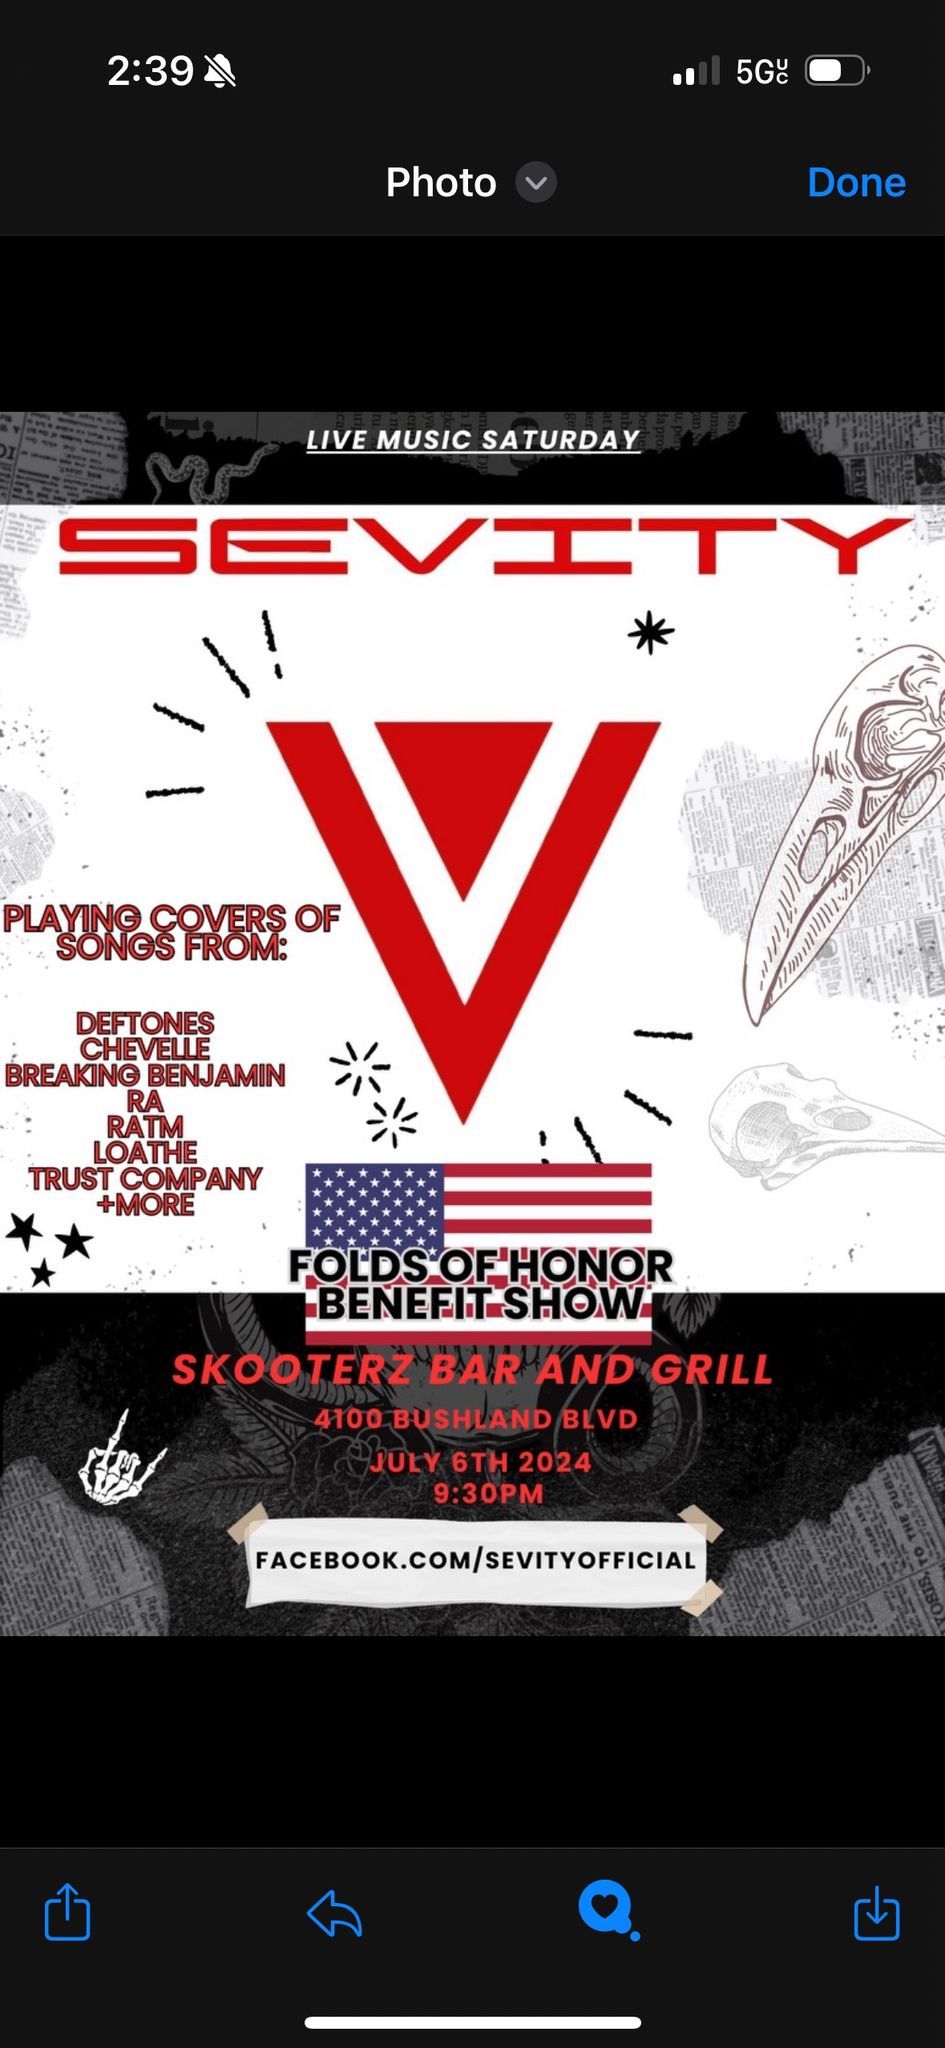 SEVITY W\/COVERS [DEFTONES,Chevelle,BB] \/\/ FOLDS OF HONOR BENEFIT SHOW 